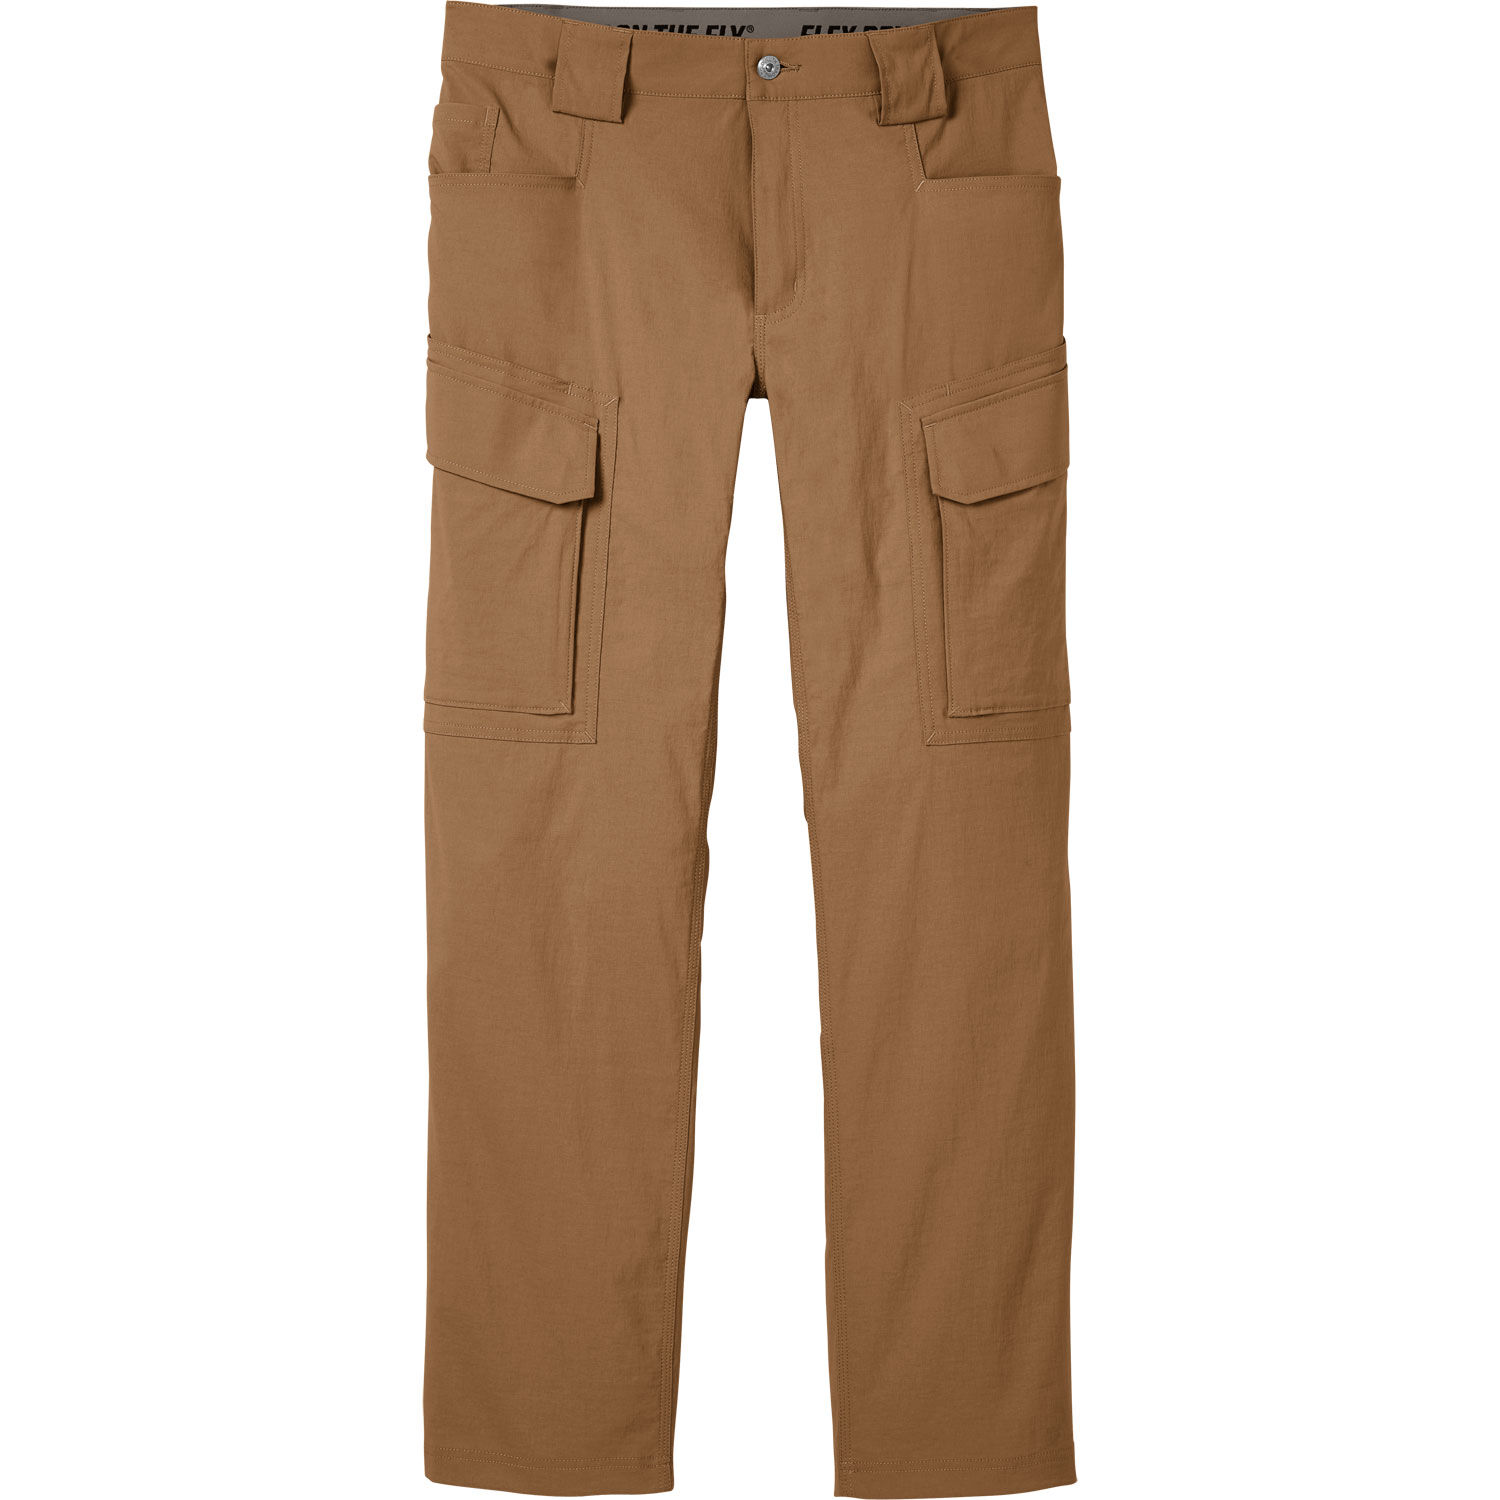 Mens 40 Grit Flex Twill Standard Fit Cargo Pants  Duluth Trading Company